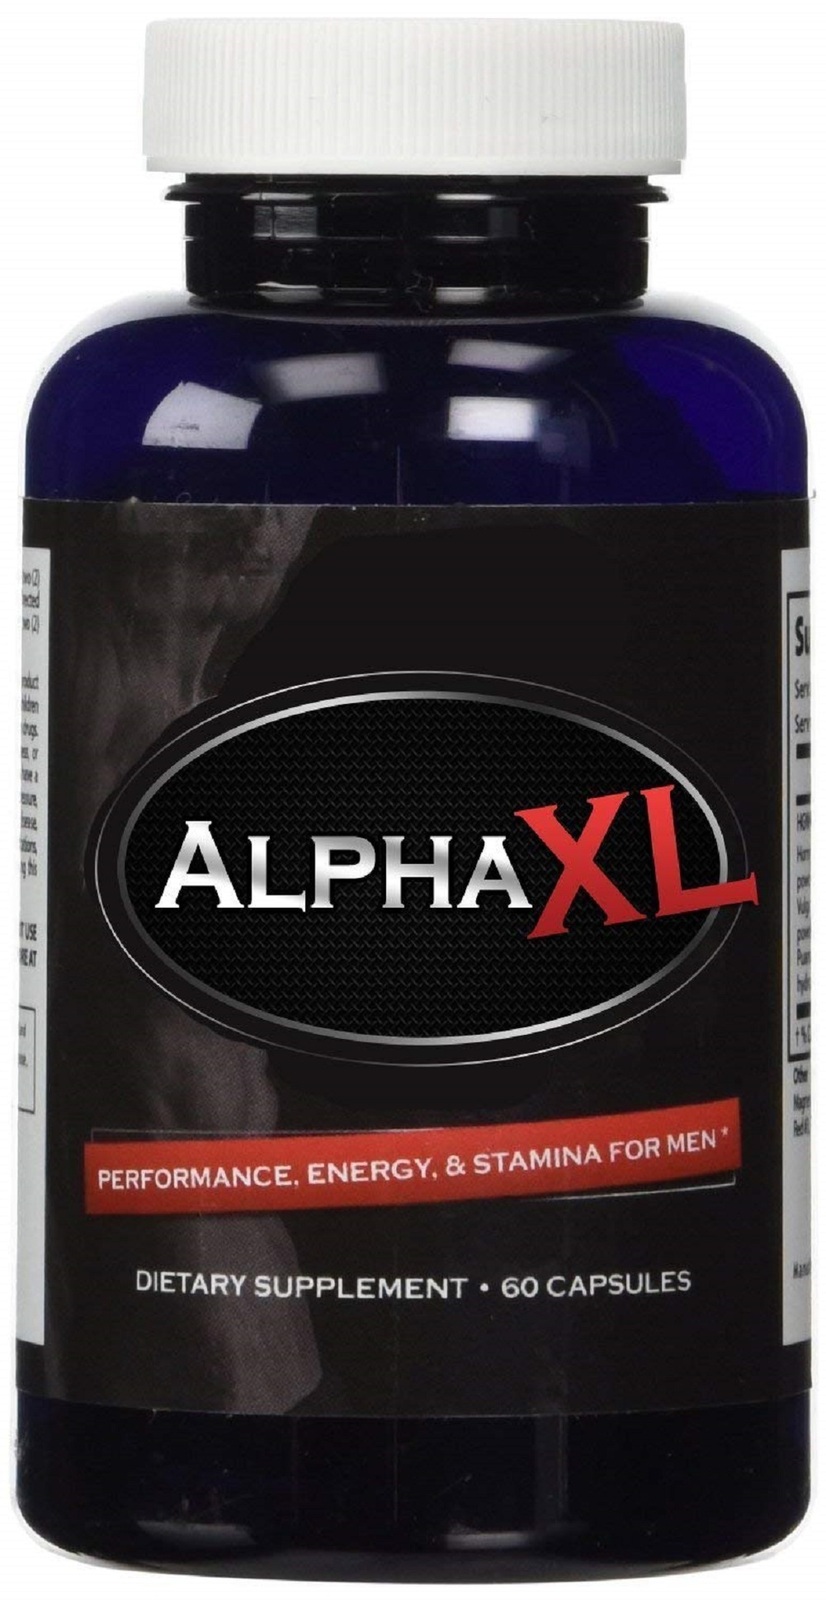 Alpha Xl Most Potent Powerful Natural Male Enhancement Pills Clinically Proven Other 7171